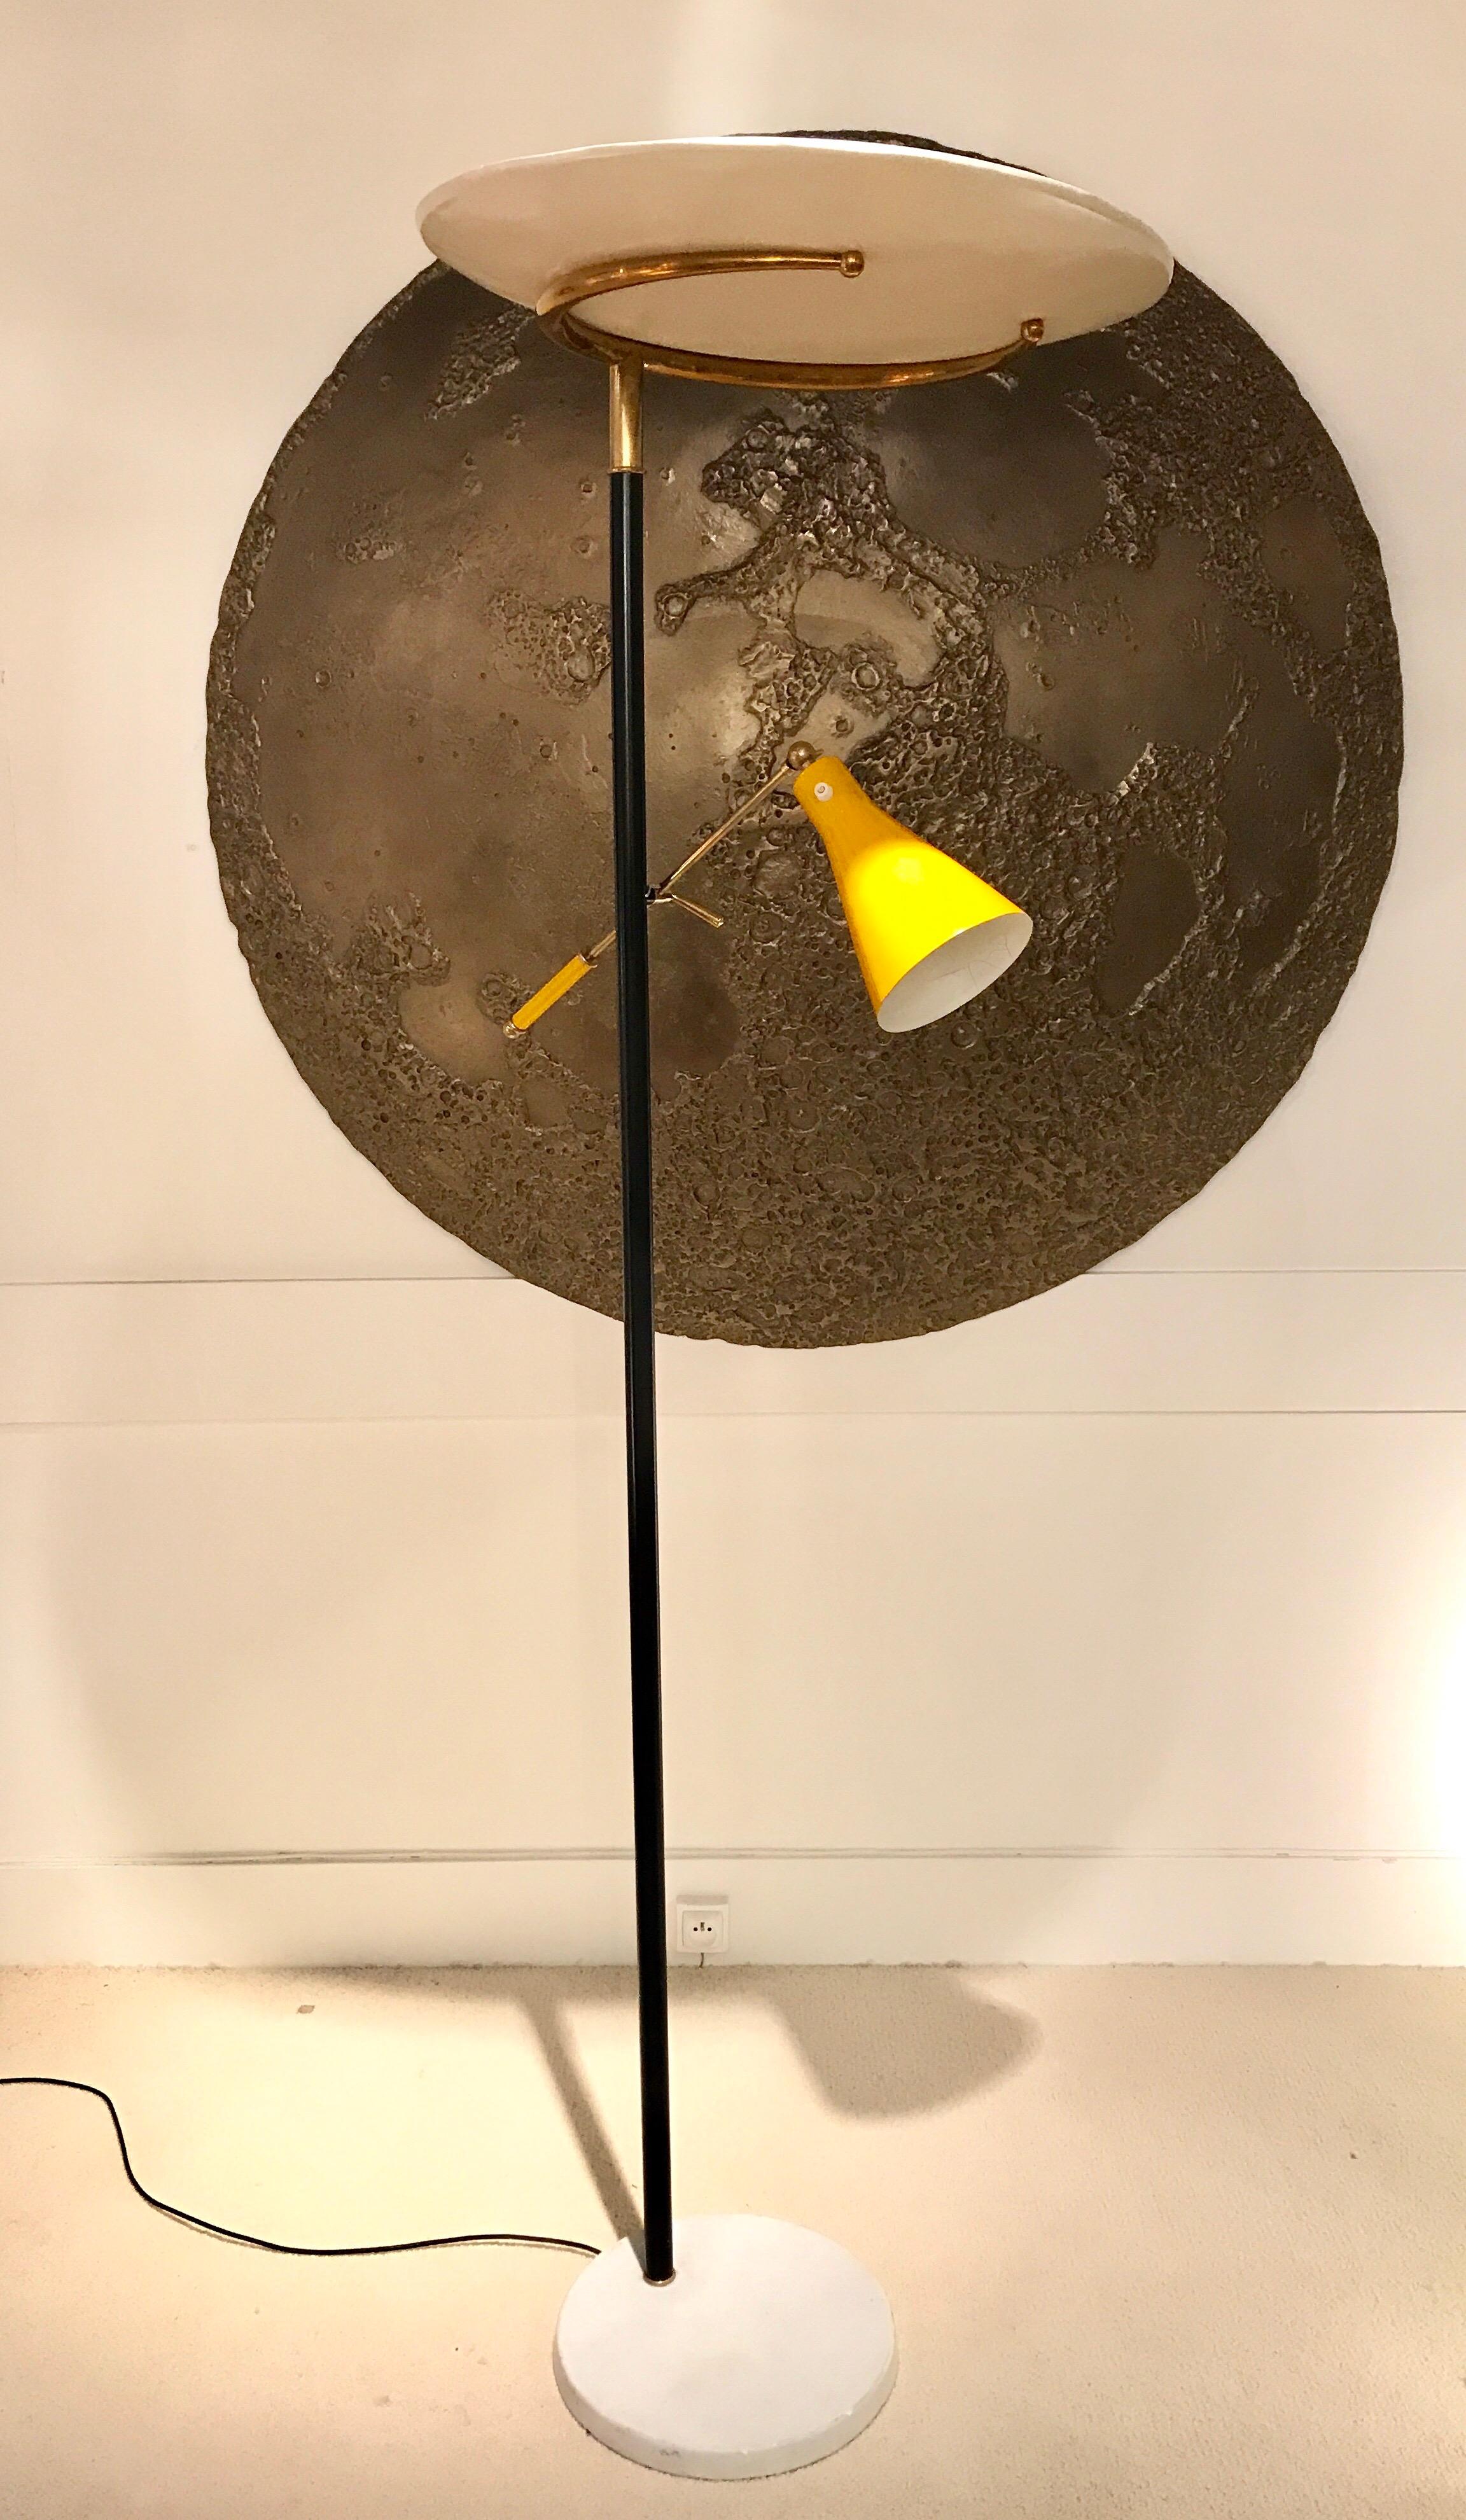 1950s Italian floor lamp by Lumen.
Brass details and white marble base
Yellow adjustable arm
360 degrees rotating white top shade
Vintage condition
Rewired.
        